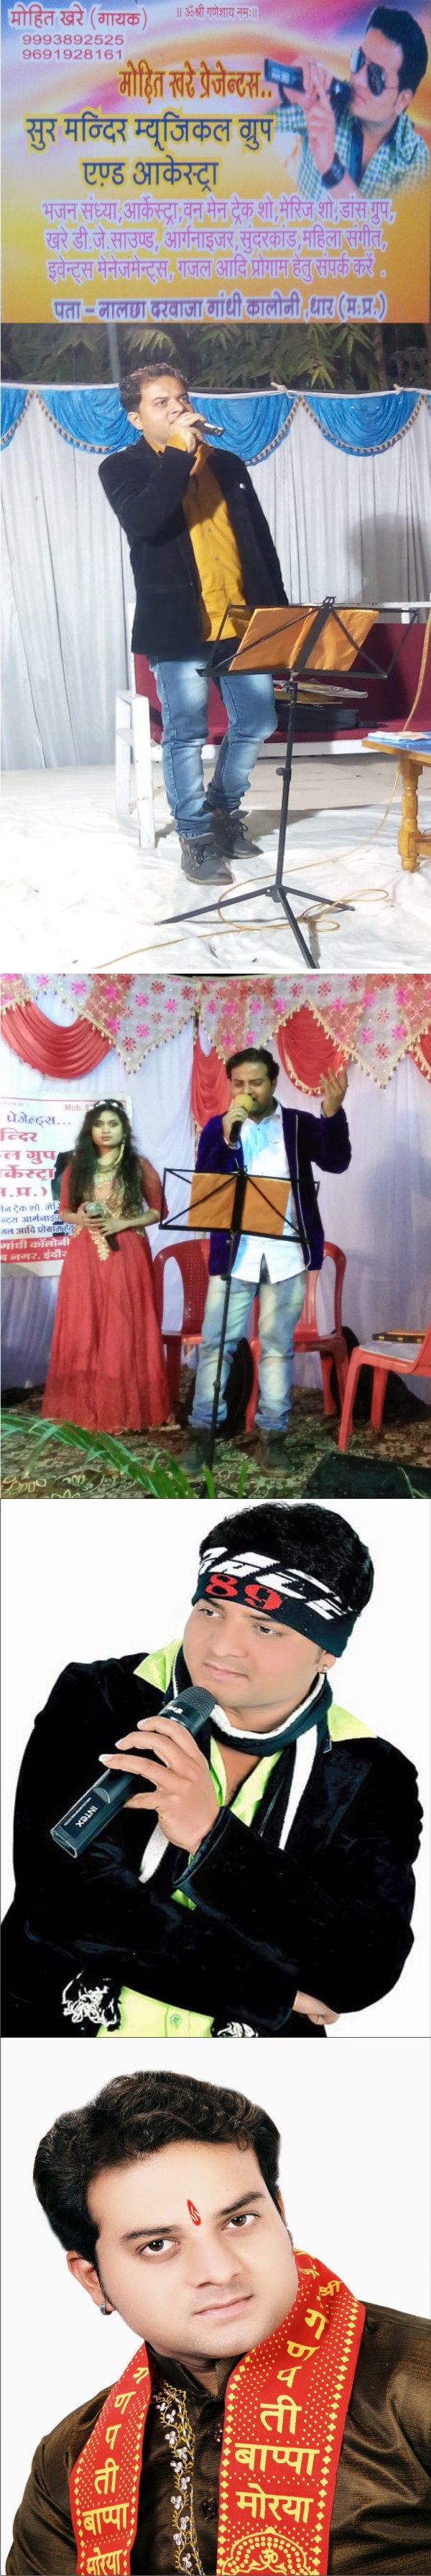 SUR MANDIR MUSIACAL GROUP AND ORKSTRA